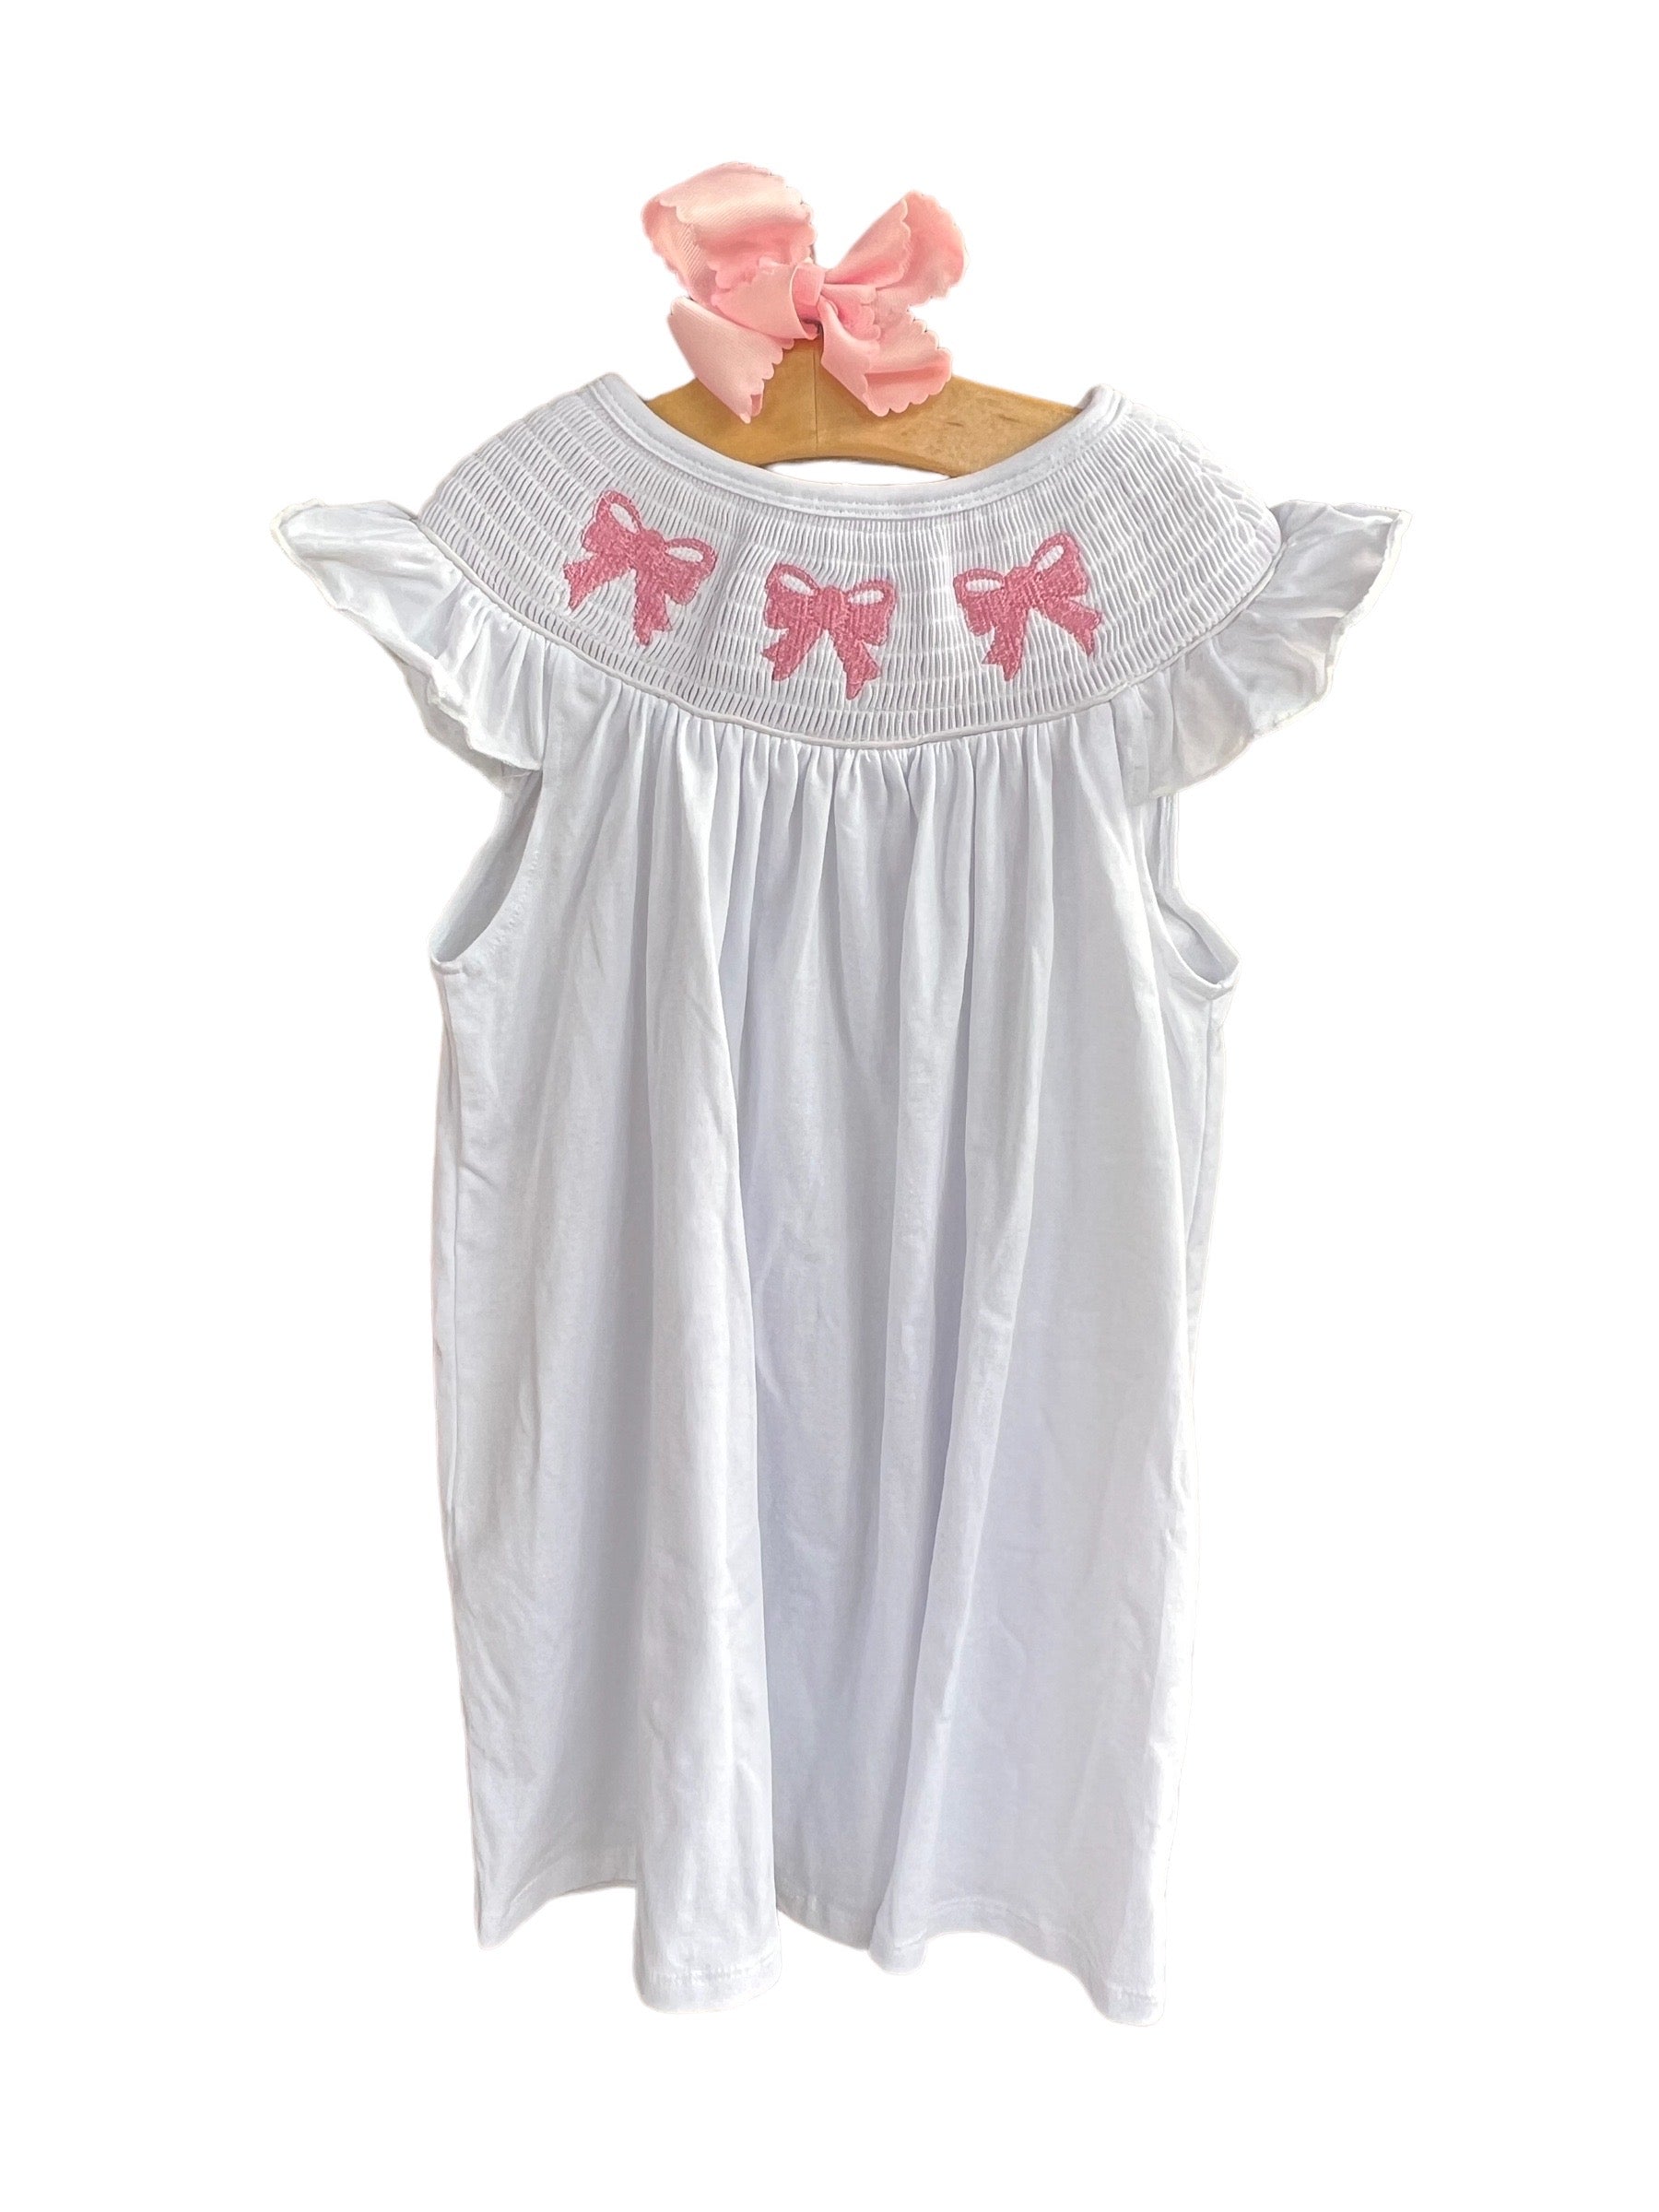 Pink Bow Smocked White Dress with Cap Sleeves